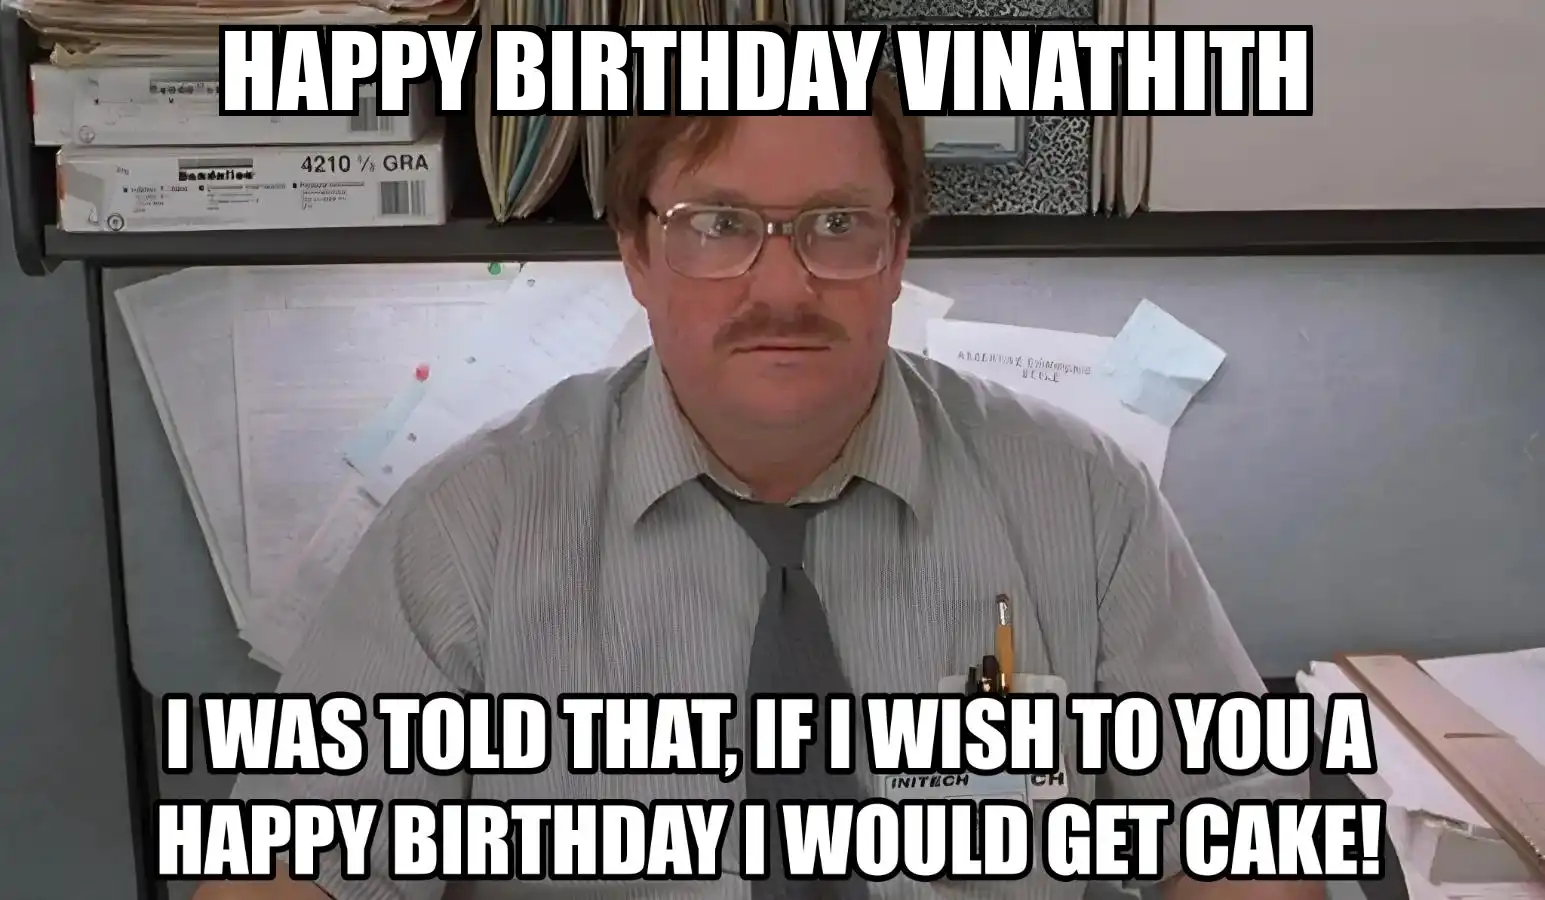 Happy Birthday Vinathith I Would Get A Cake Meme